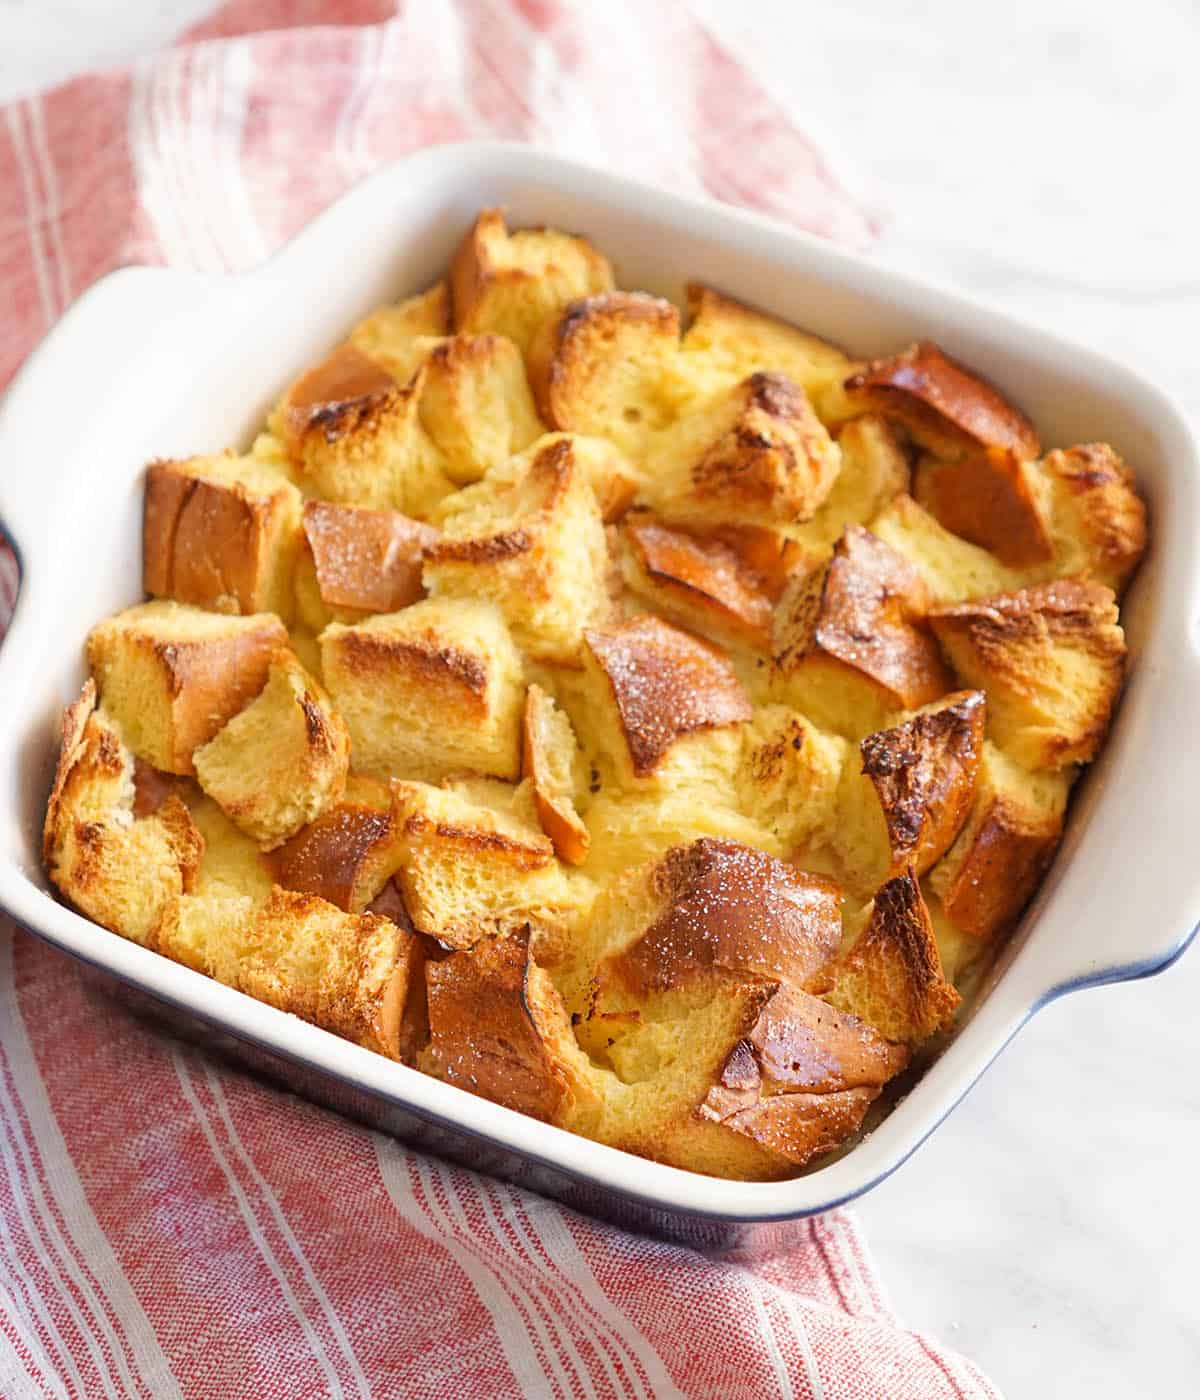 A dish of bread pudding after being baked.